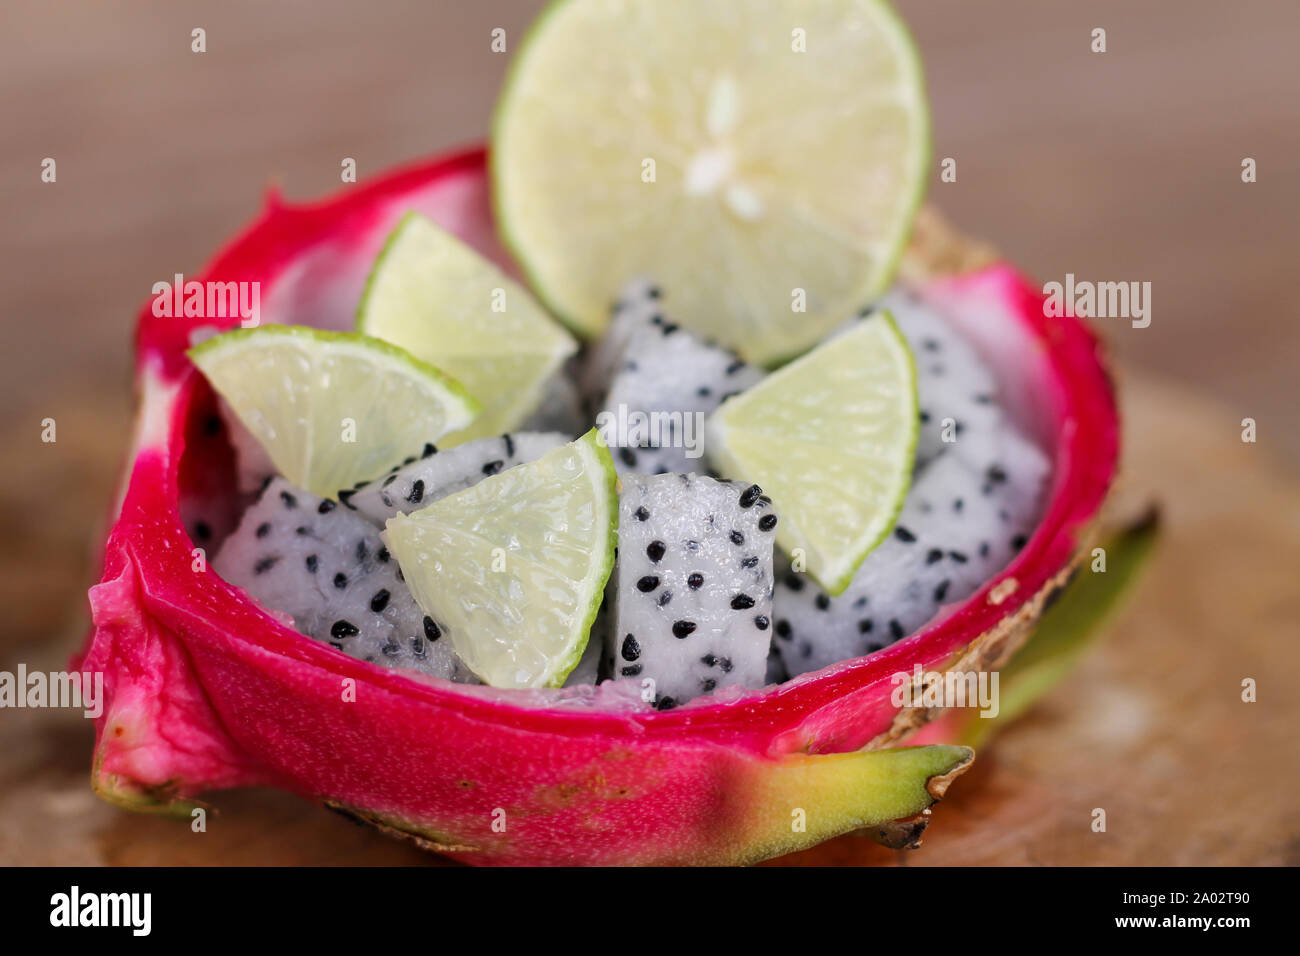 Dragon fruit sliced and lime sliced in a haft of dragon fruit peel on old wooden table background. Stock Photo